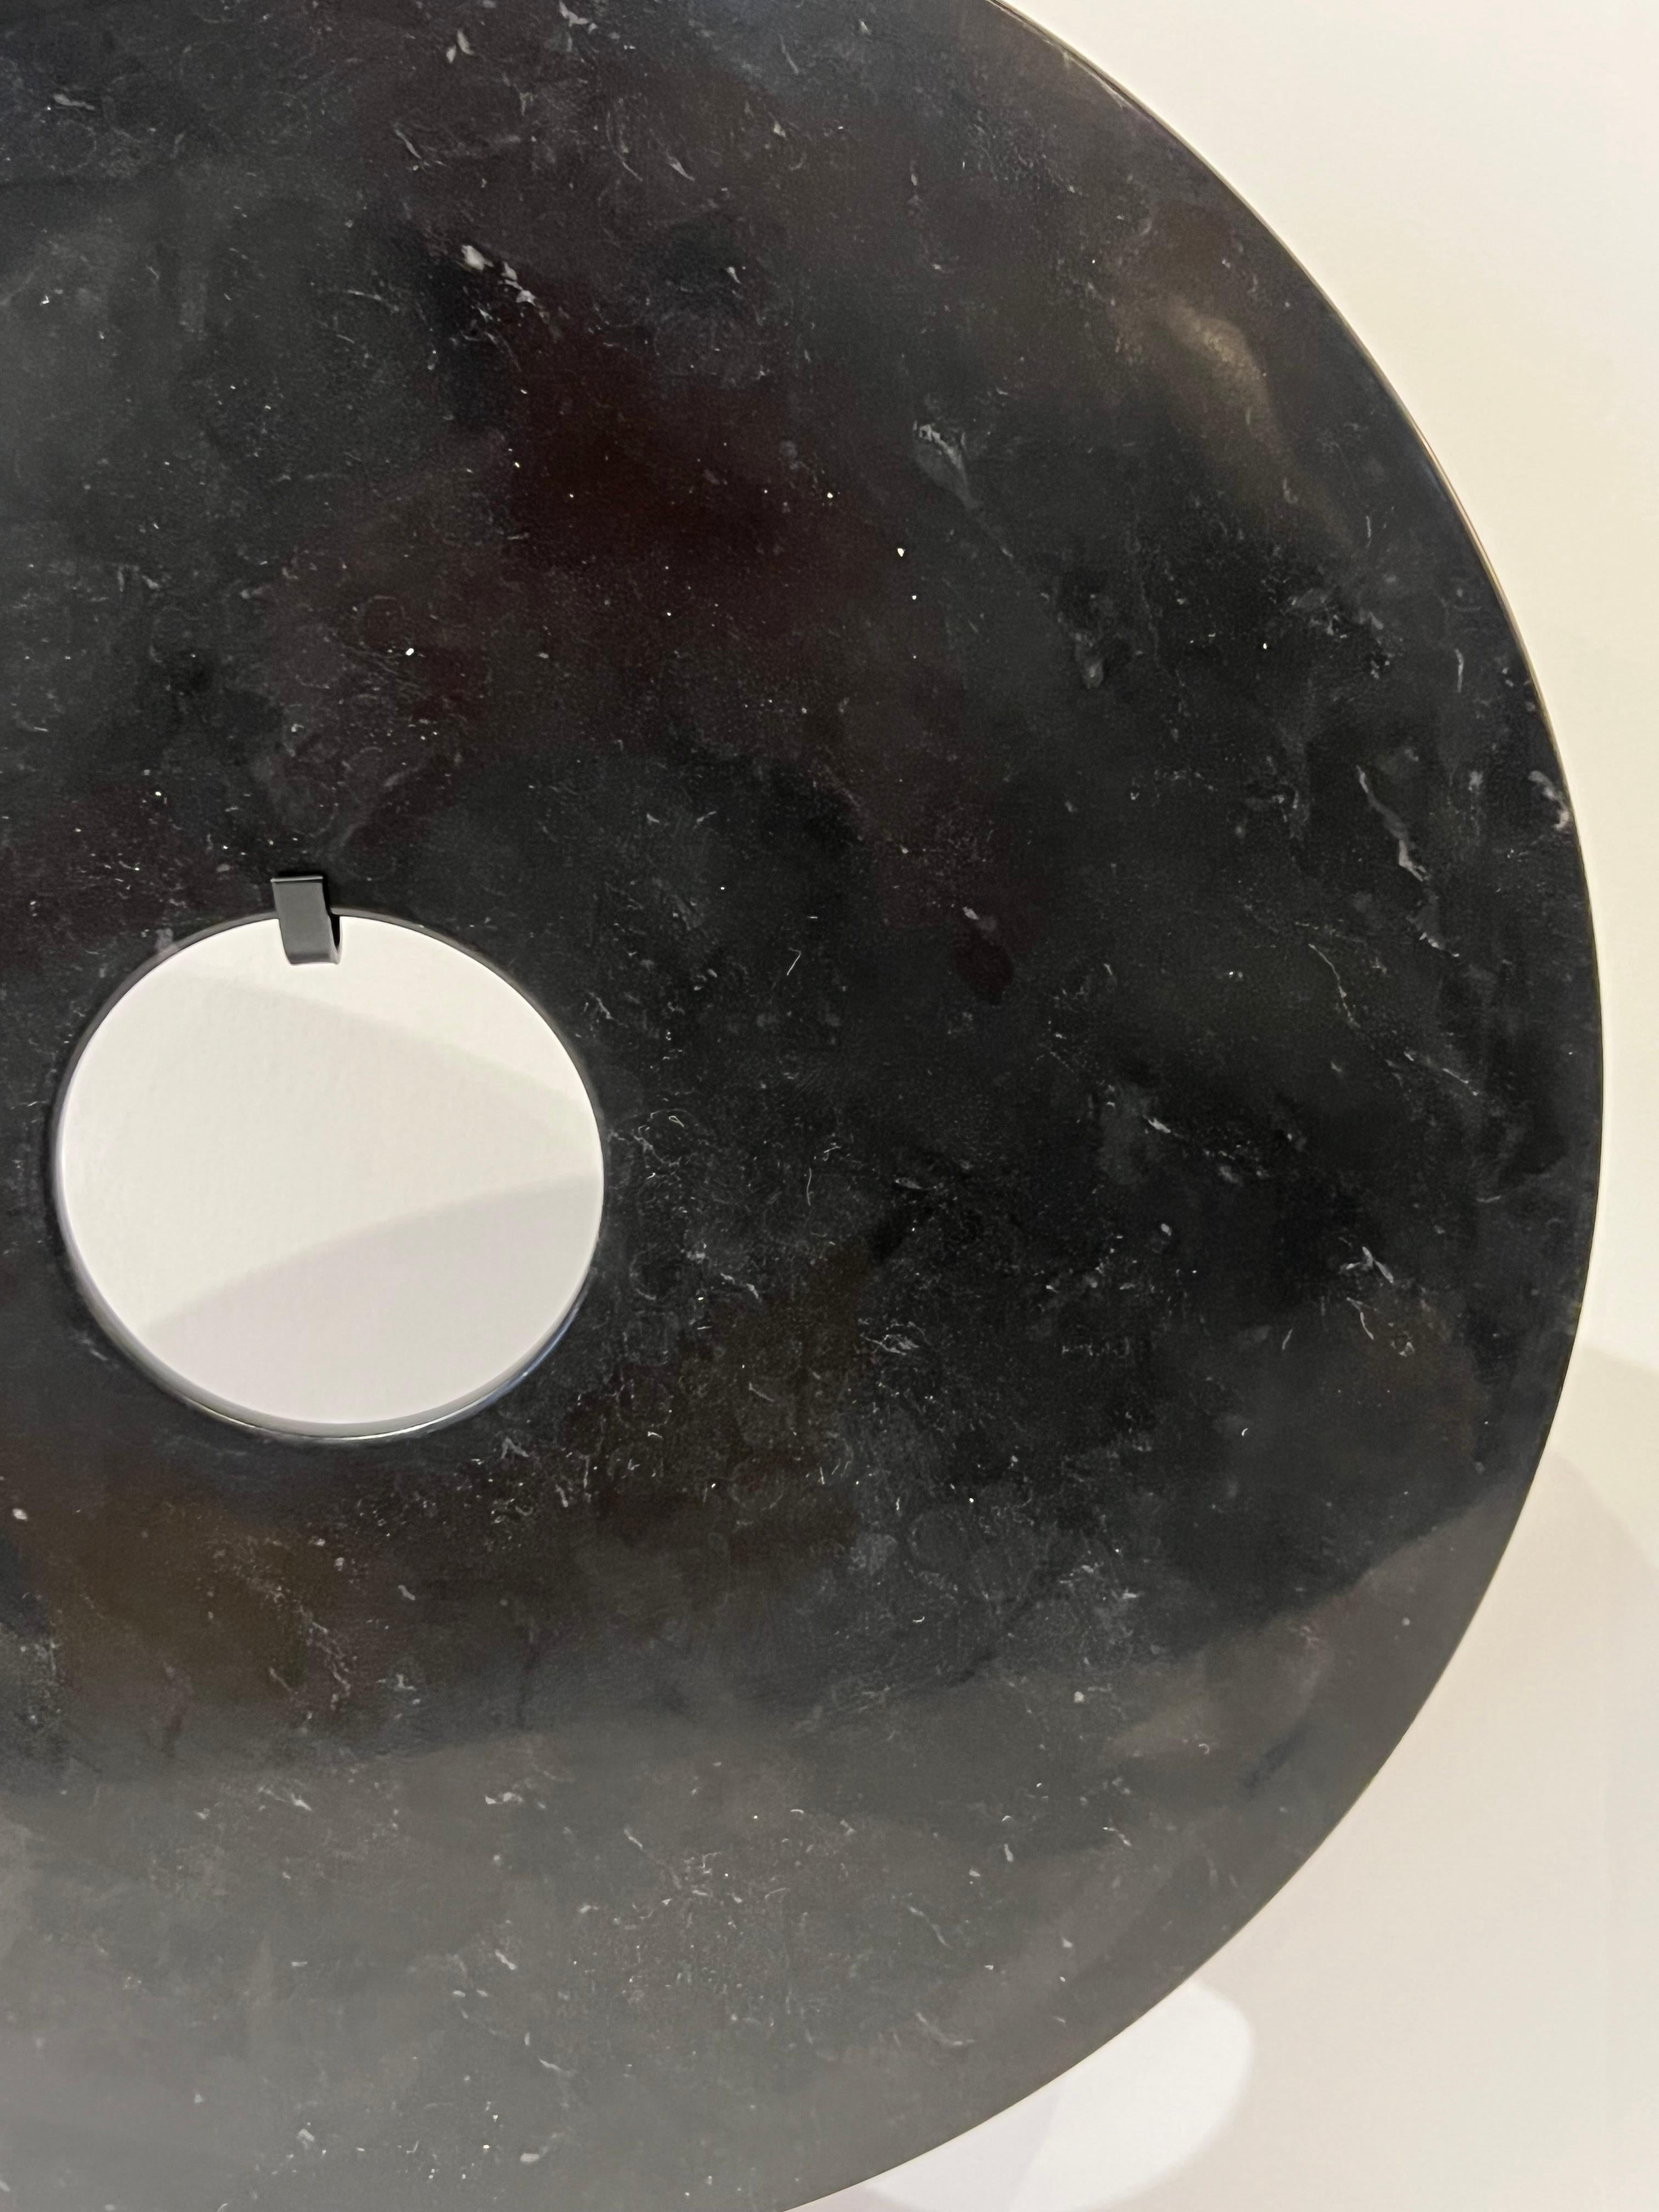 marble disk on stand